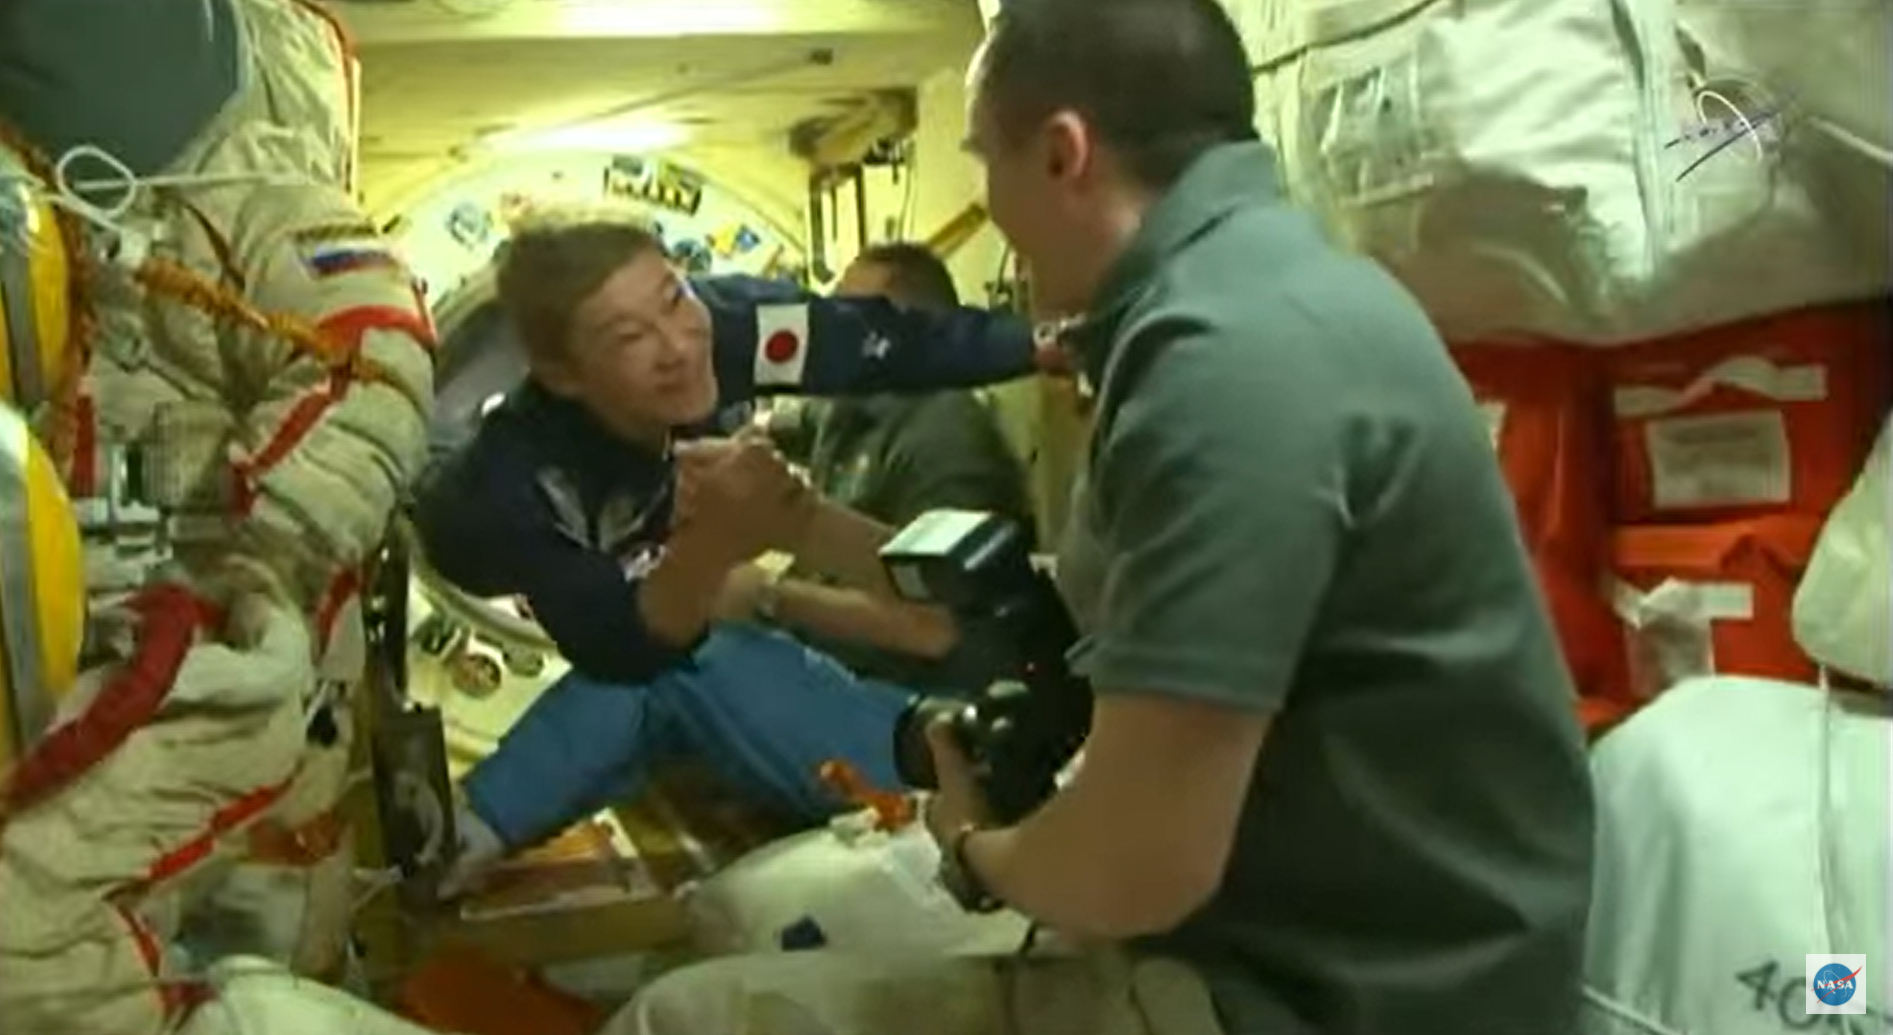 Japanese entrepreneur Yusaku Maezawa enters the International Space Station to begin a 12-day space tourist trip following a Soyuz launch and docking on Dec. 8, 2021.